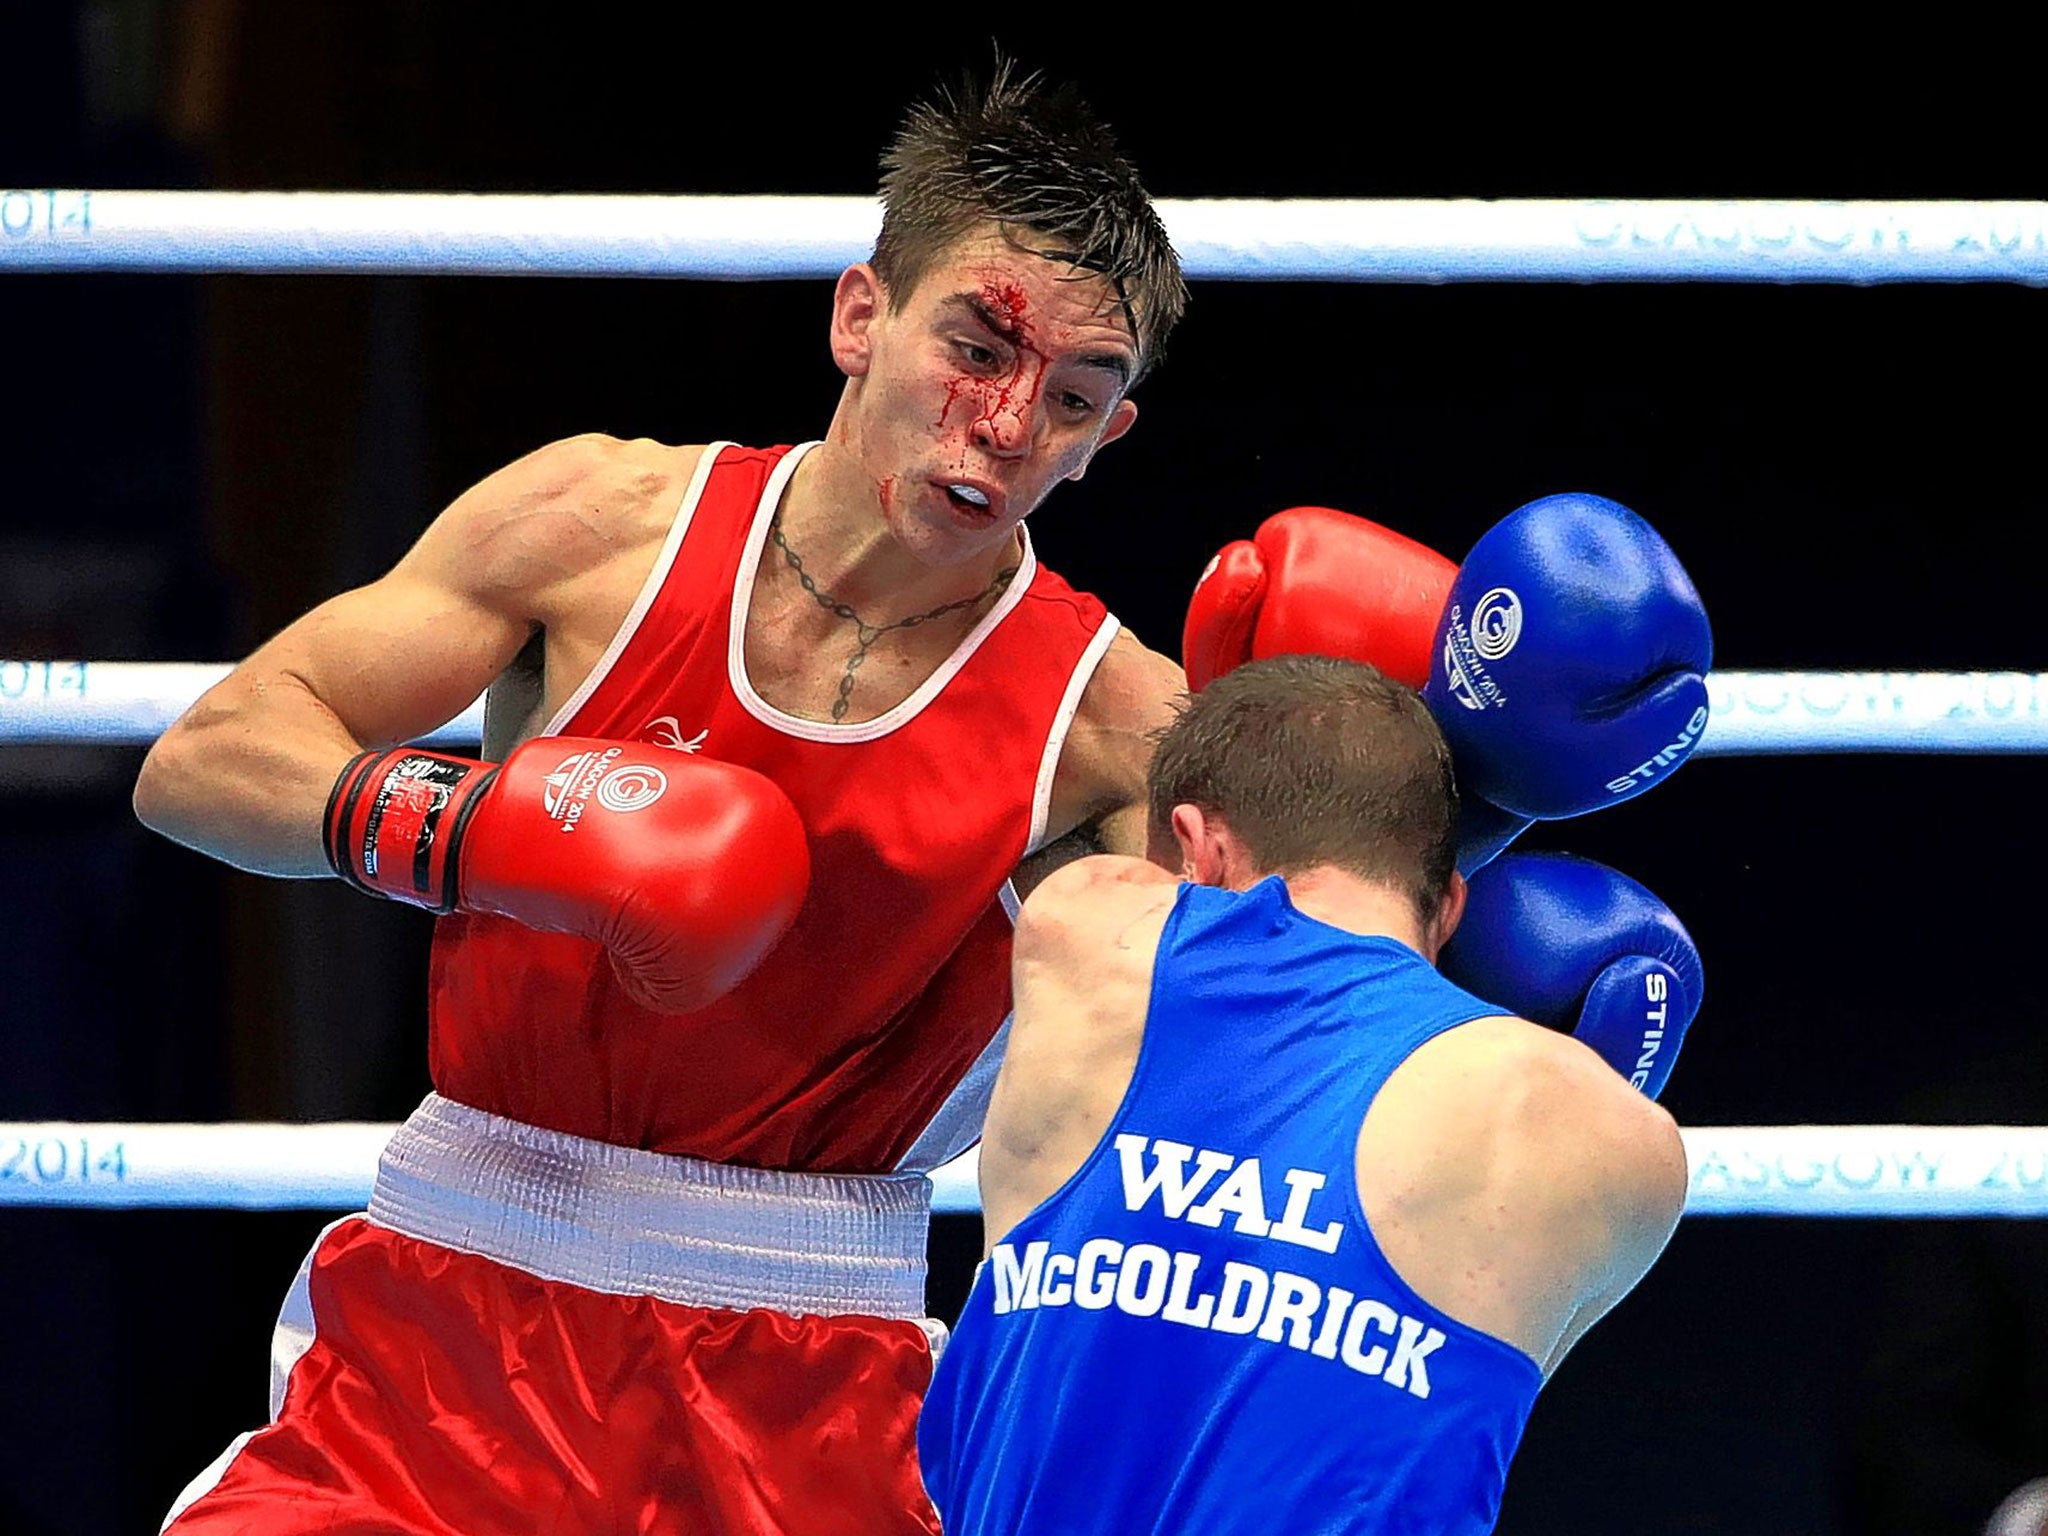 Belfast’s Michael Conlan bravely fights on despite suffering a painful cut to his face against Wales’ Sean McGoldrick in their bantamweight semi-final in Glasgow